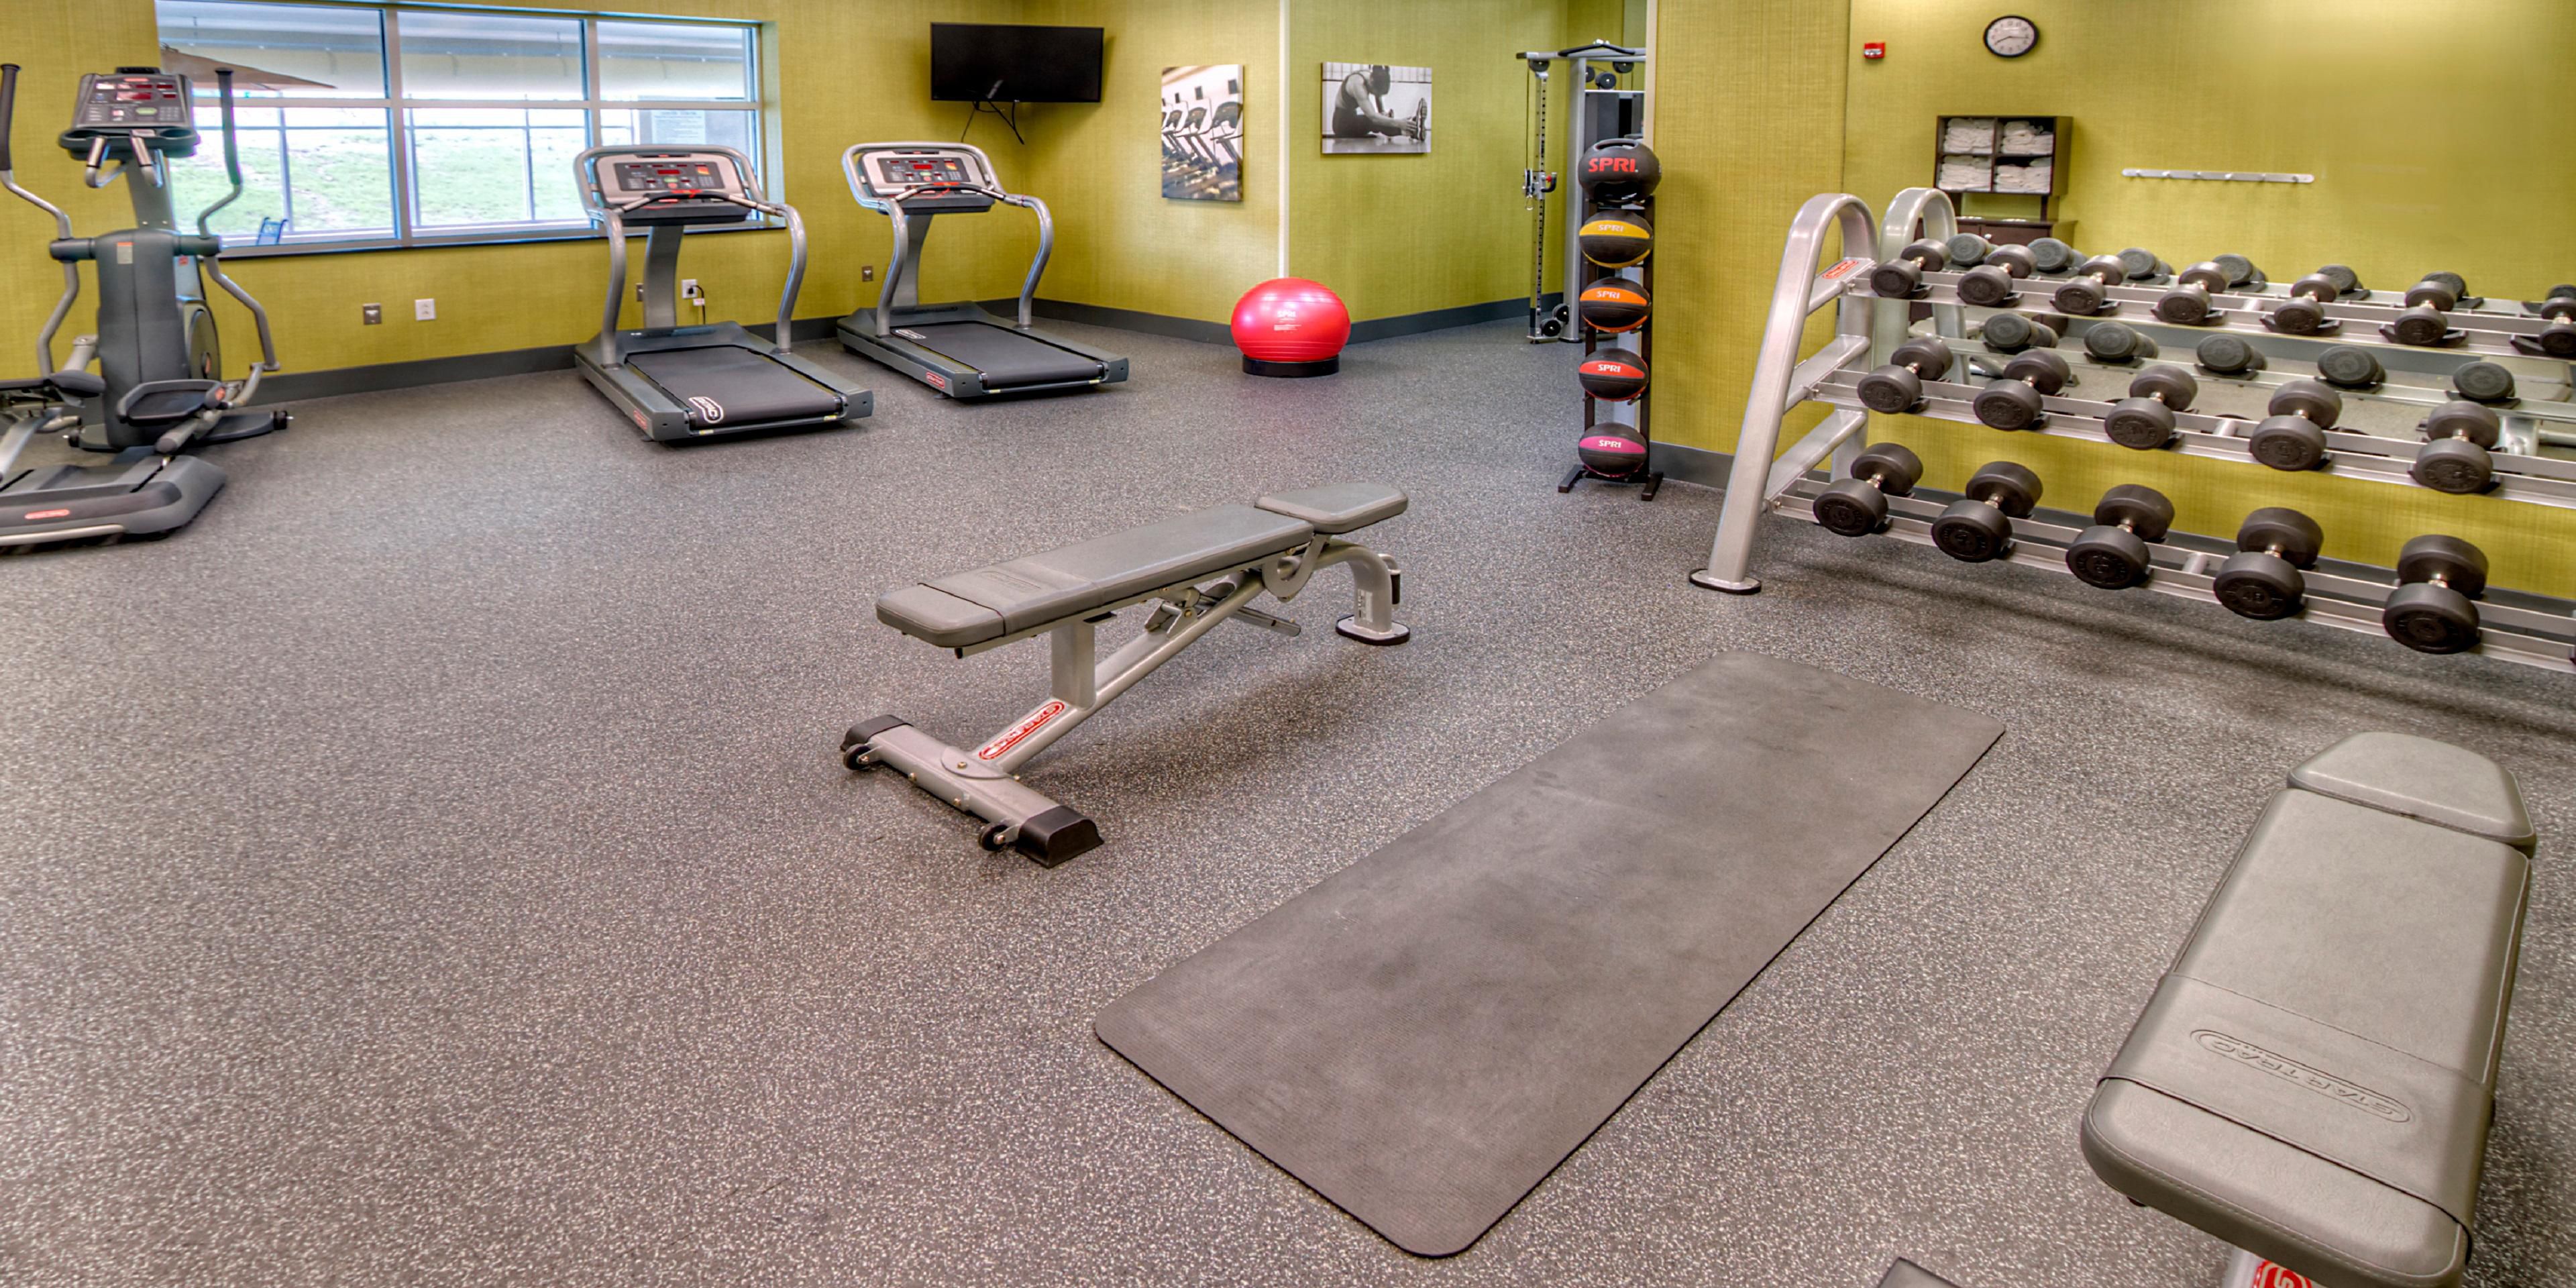 Don't lose your exercise routine when traveling. The Holiday Inn Express & Suites located in the Southpointe Business Park in Canonsburg, PA will have you covered. Our very spacious gym has from free weights to cardio equipment for a full workout routine. 